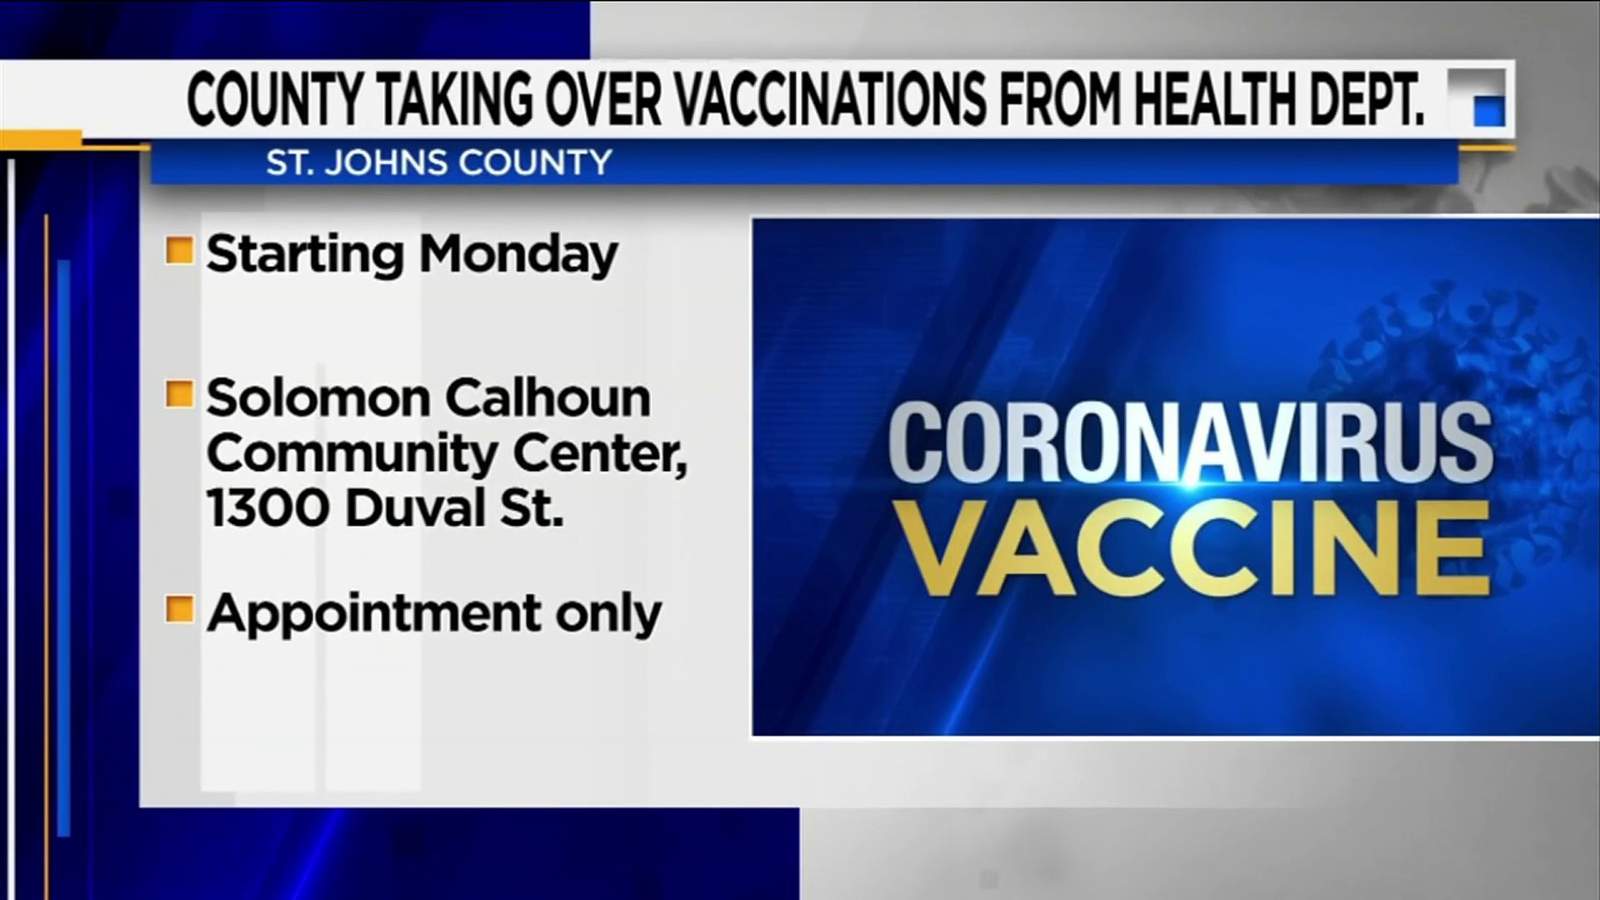 St. Johns County COVID-19 vaccine appointments booked up